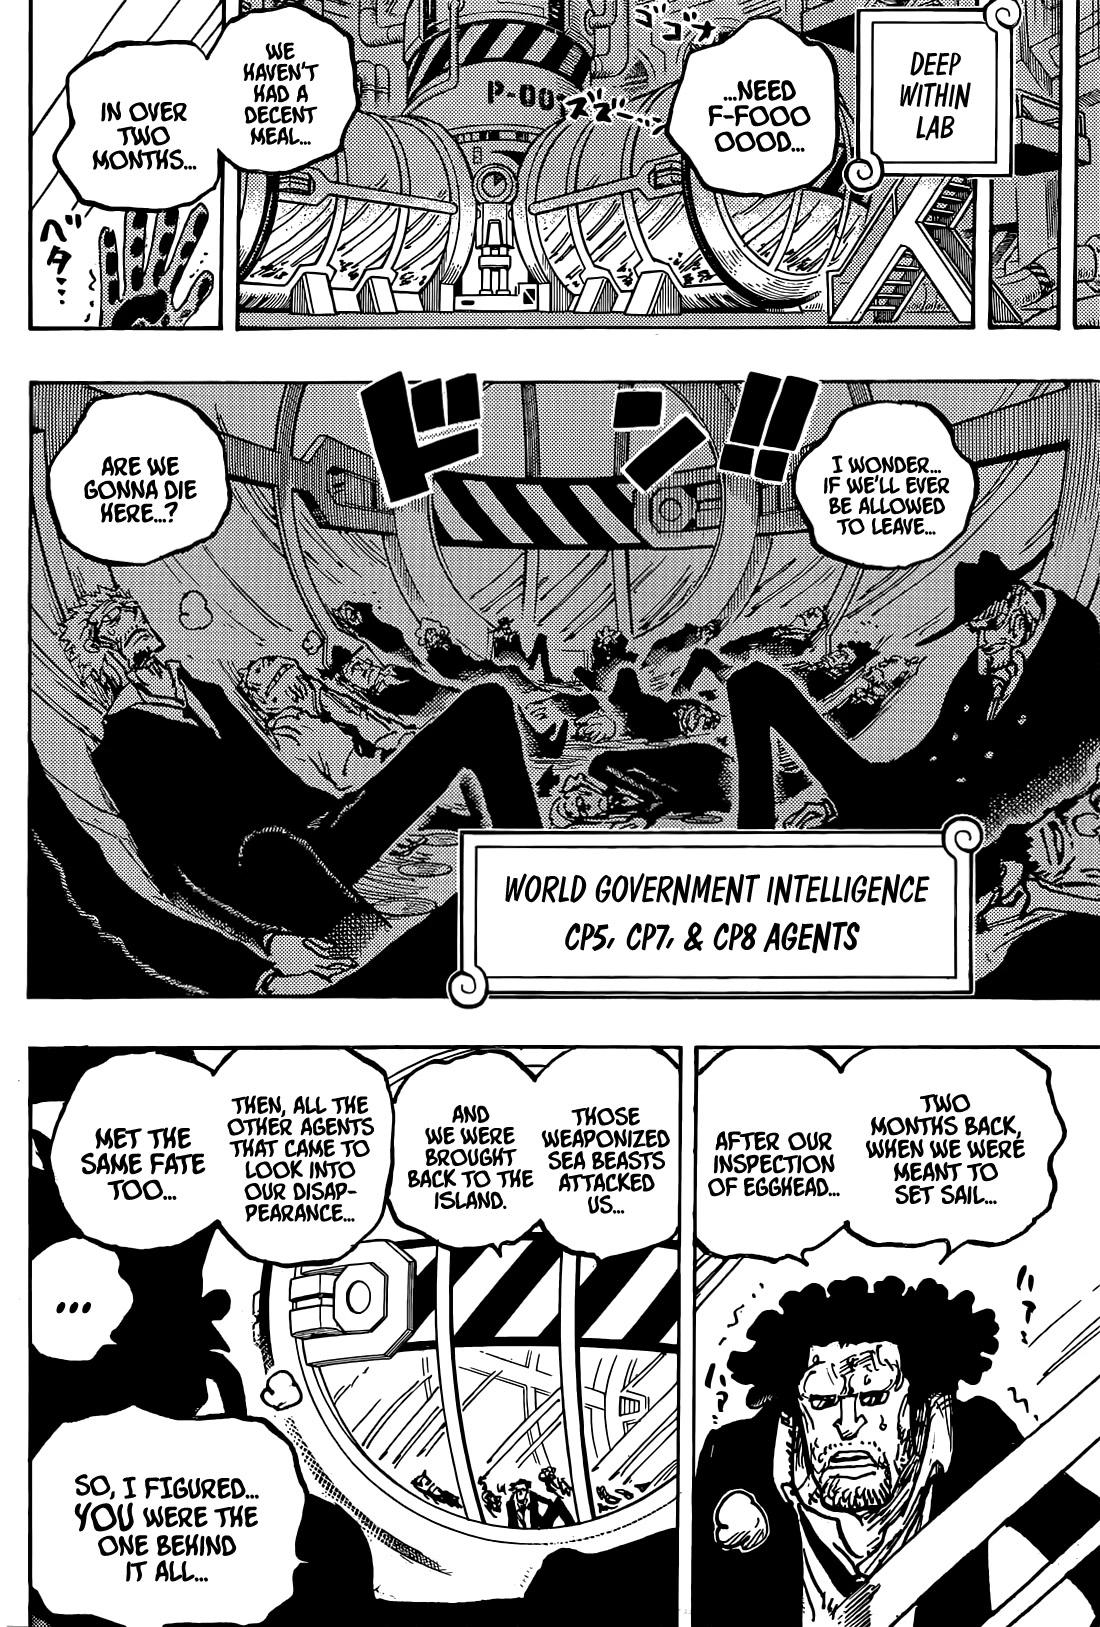 One Piece 1026 Spoilers, Raw Scans, Release Date - Anime Troop